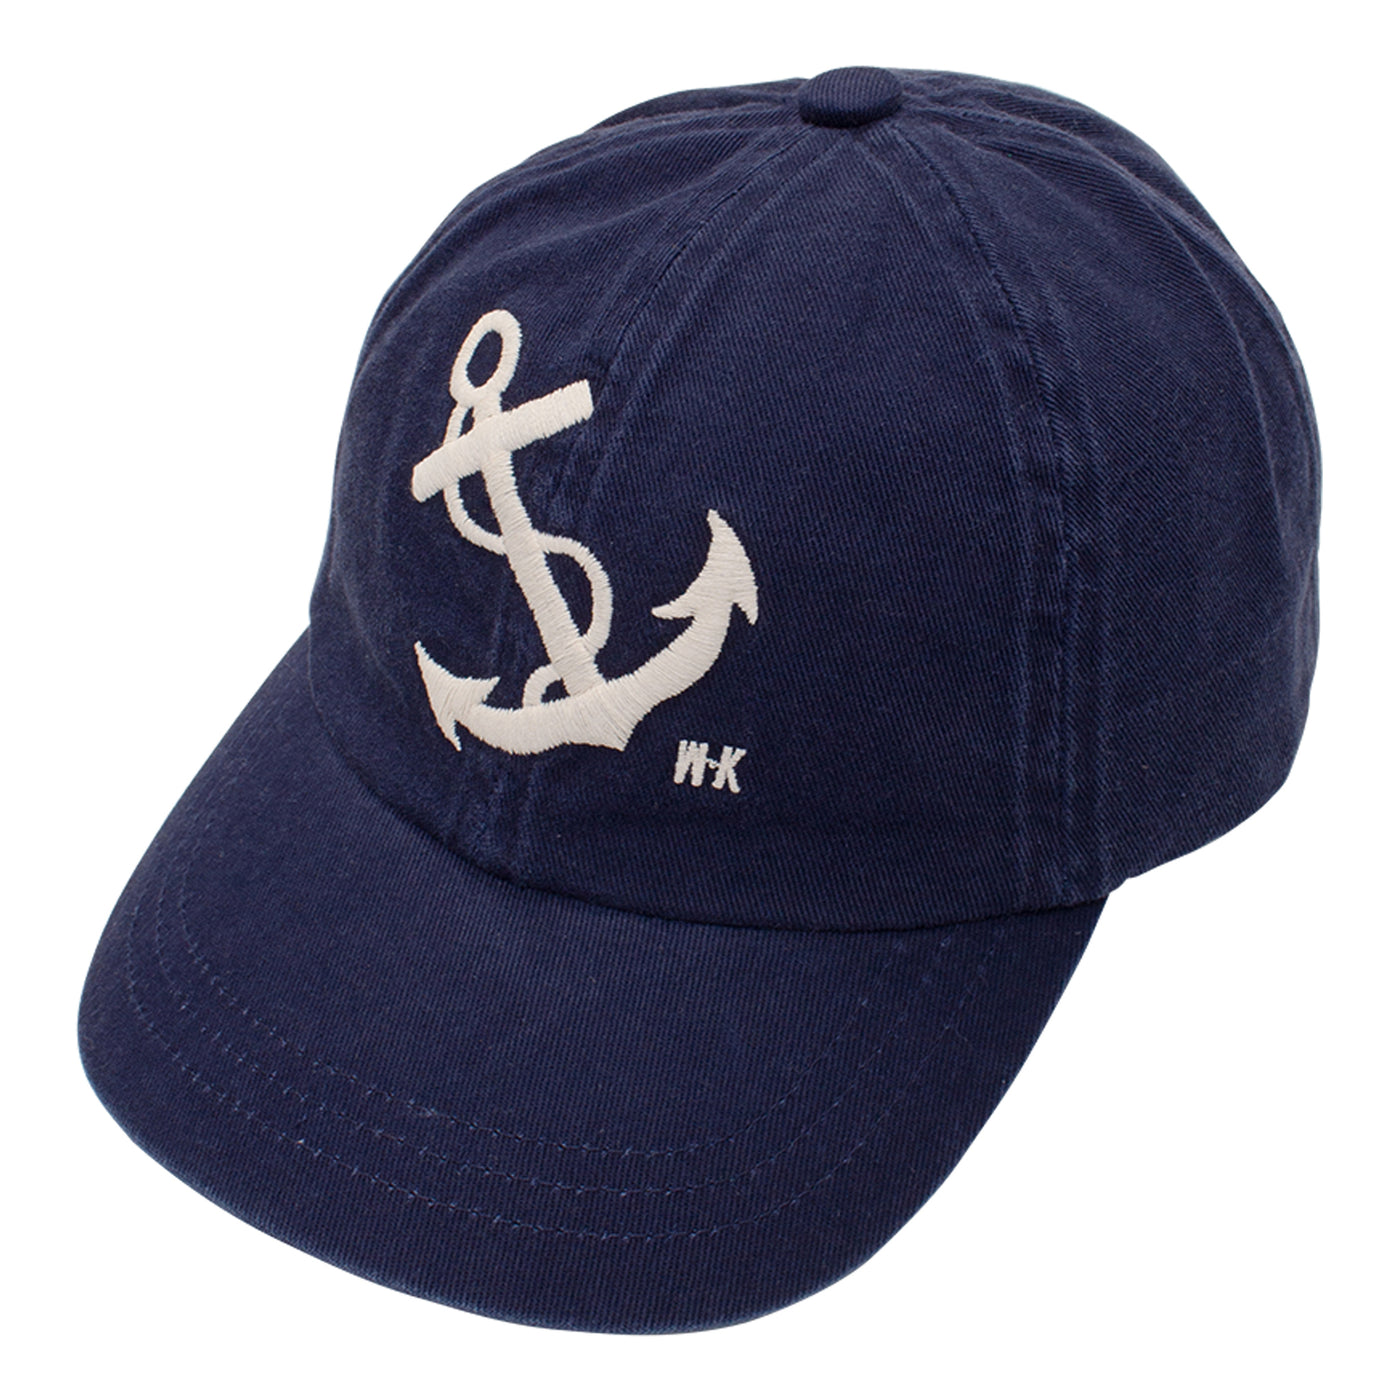 Baseball style cap in navy / with contrast Anchor embroidery on front in ecru / clip adjuster at back / 100% cotton twill